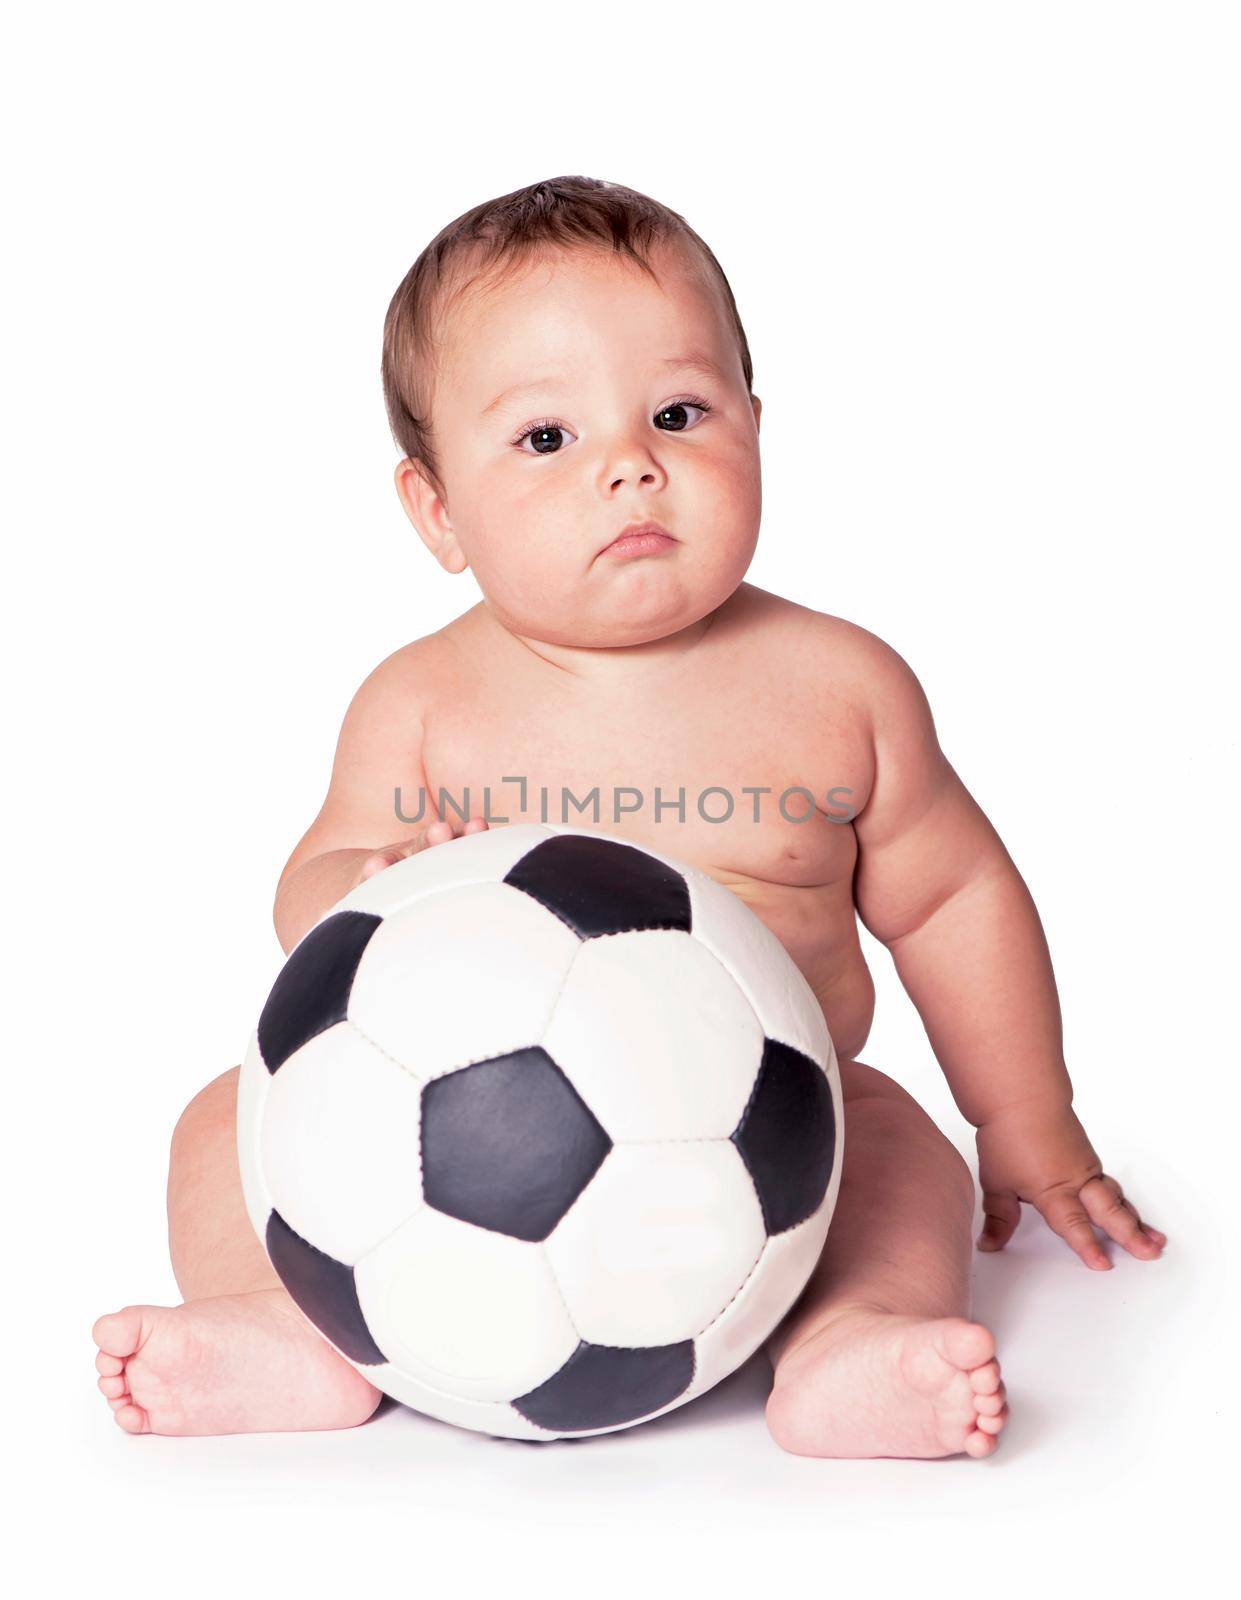 Baby playing with soccer ball. All on white background